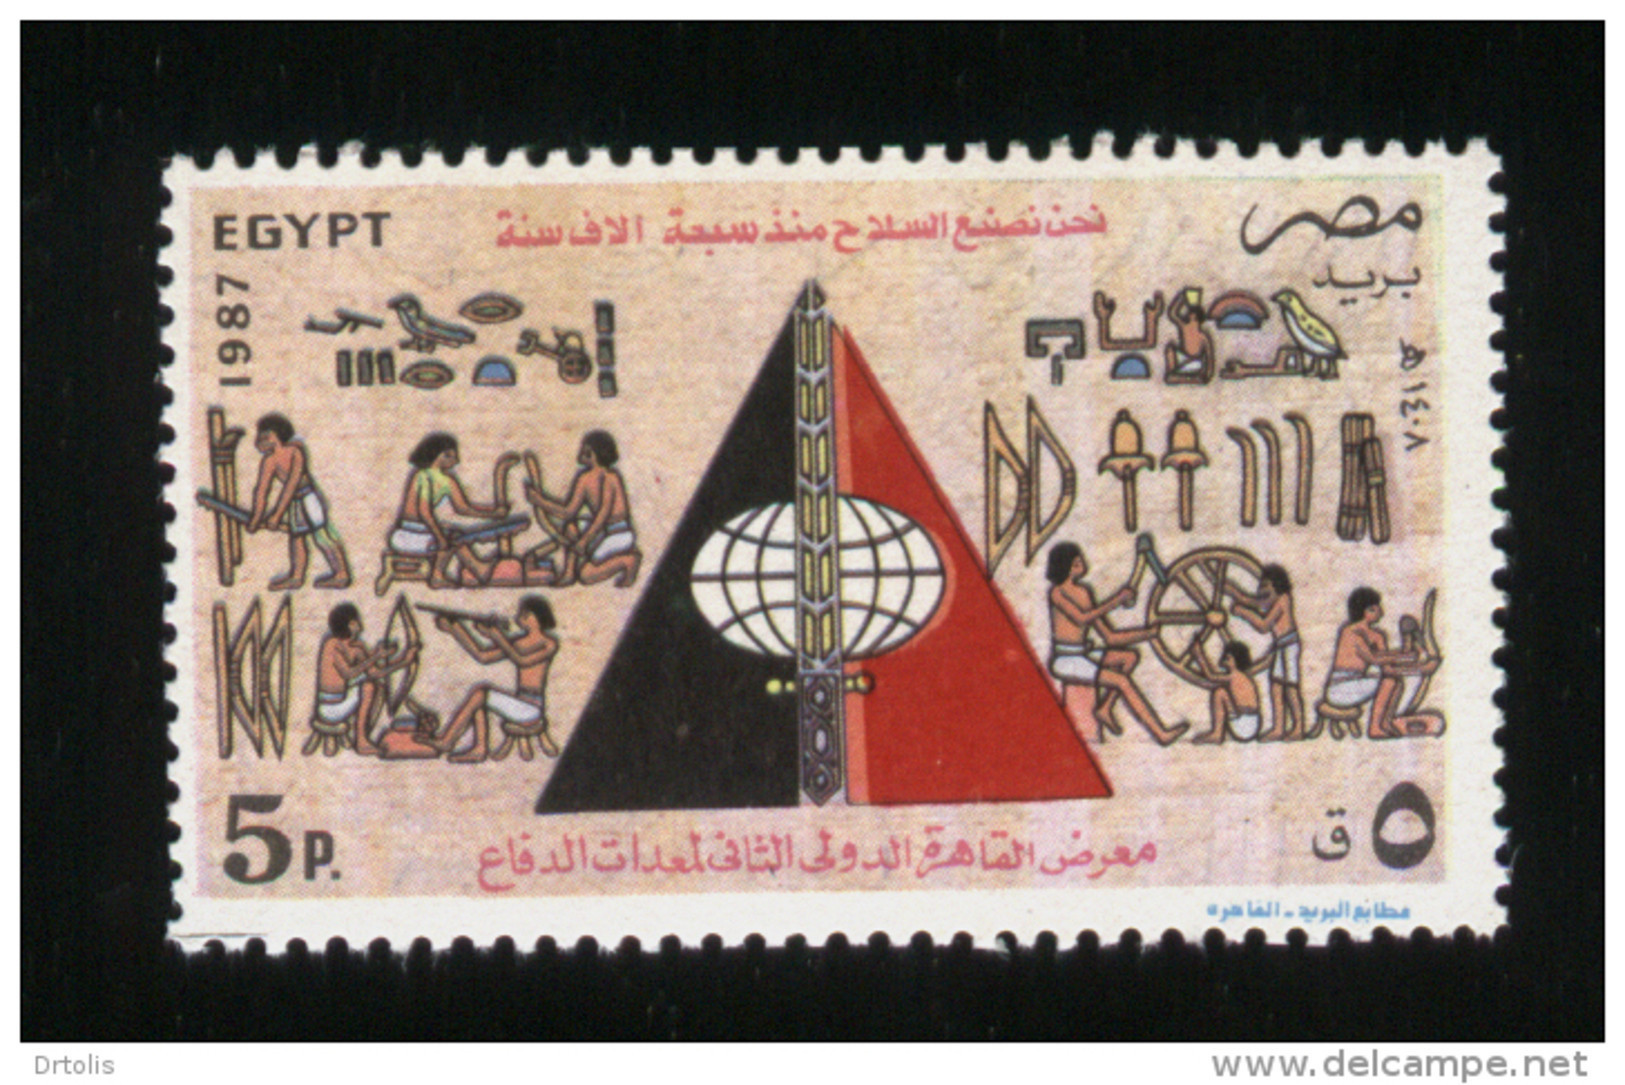 EGYPT / 1987 / INTL. DEFENCE EQUIPMENT EXHIBITION / ANCIENT EGYPTIANS MAKING WEAPONS / MNH / VF - Ongebruikt